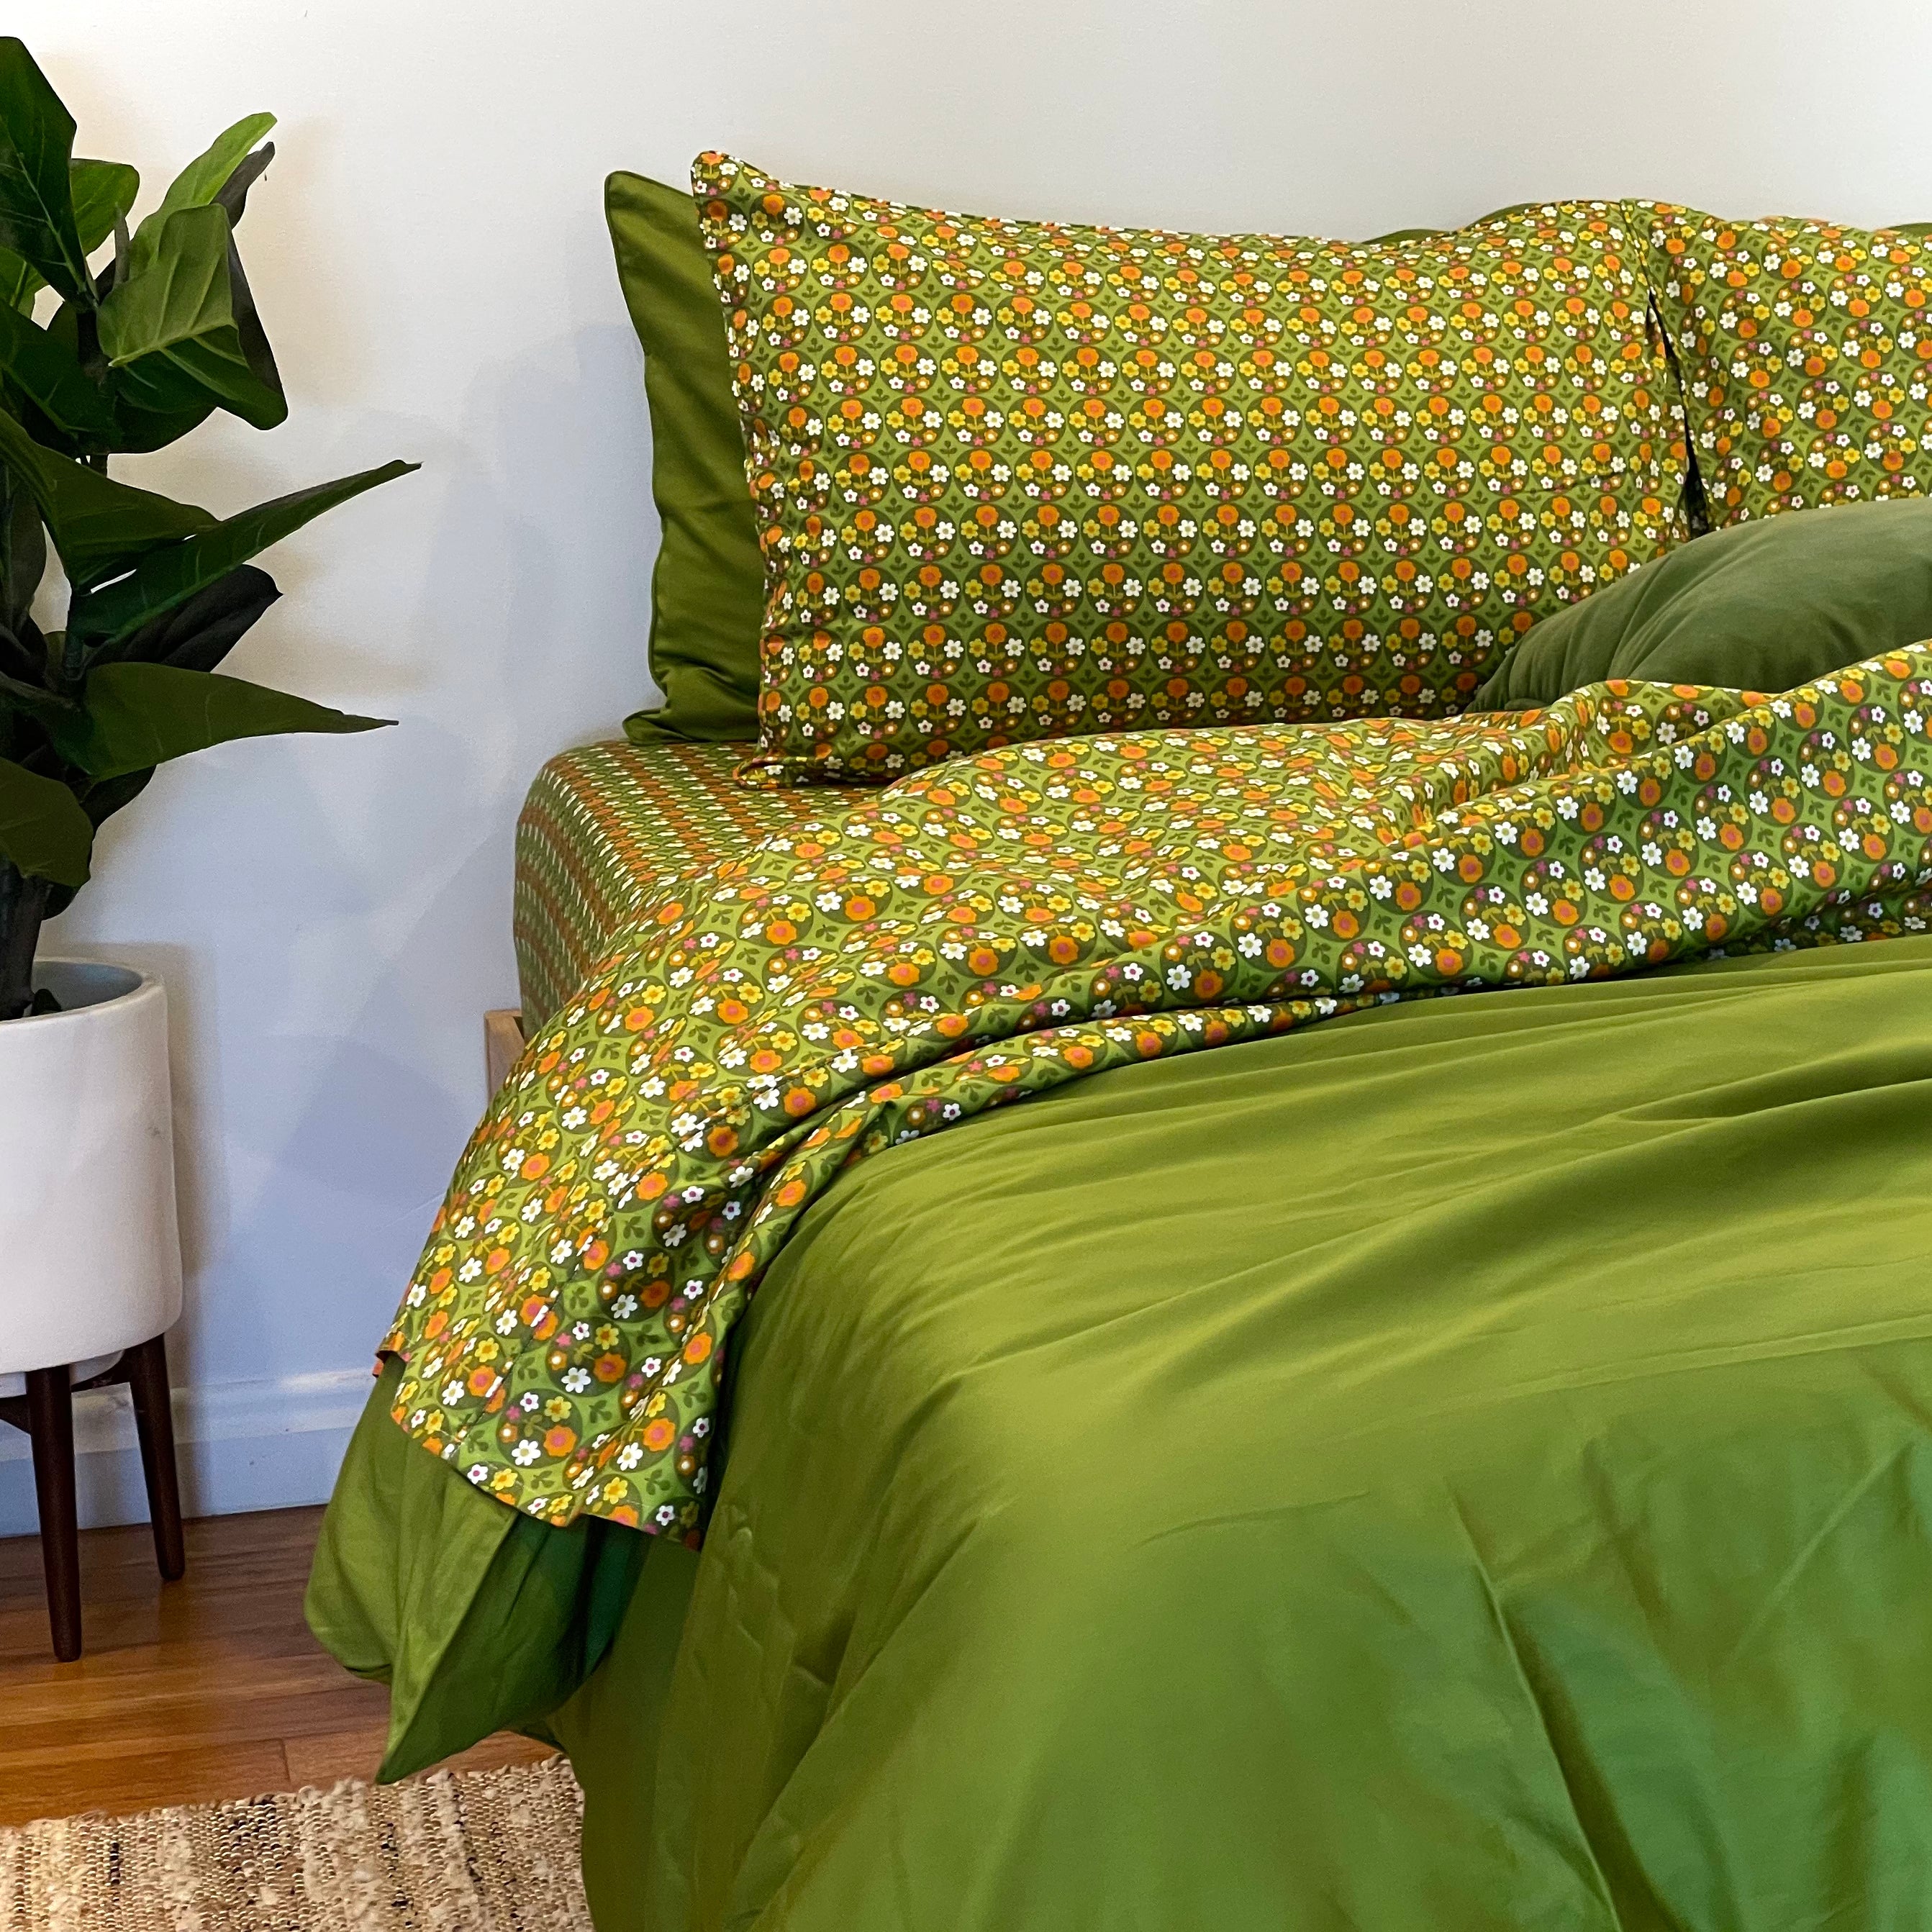 Beddie Flat and Fitted Bloom Sheets. Available in Sydney NSW. Free shipping Australia wide. Pure Cotton sheets and pillowcases in beautiful designs and colours.